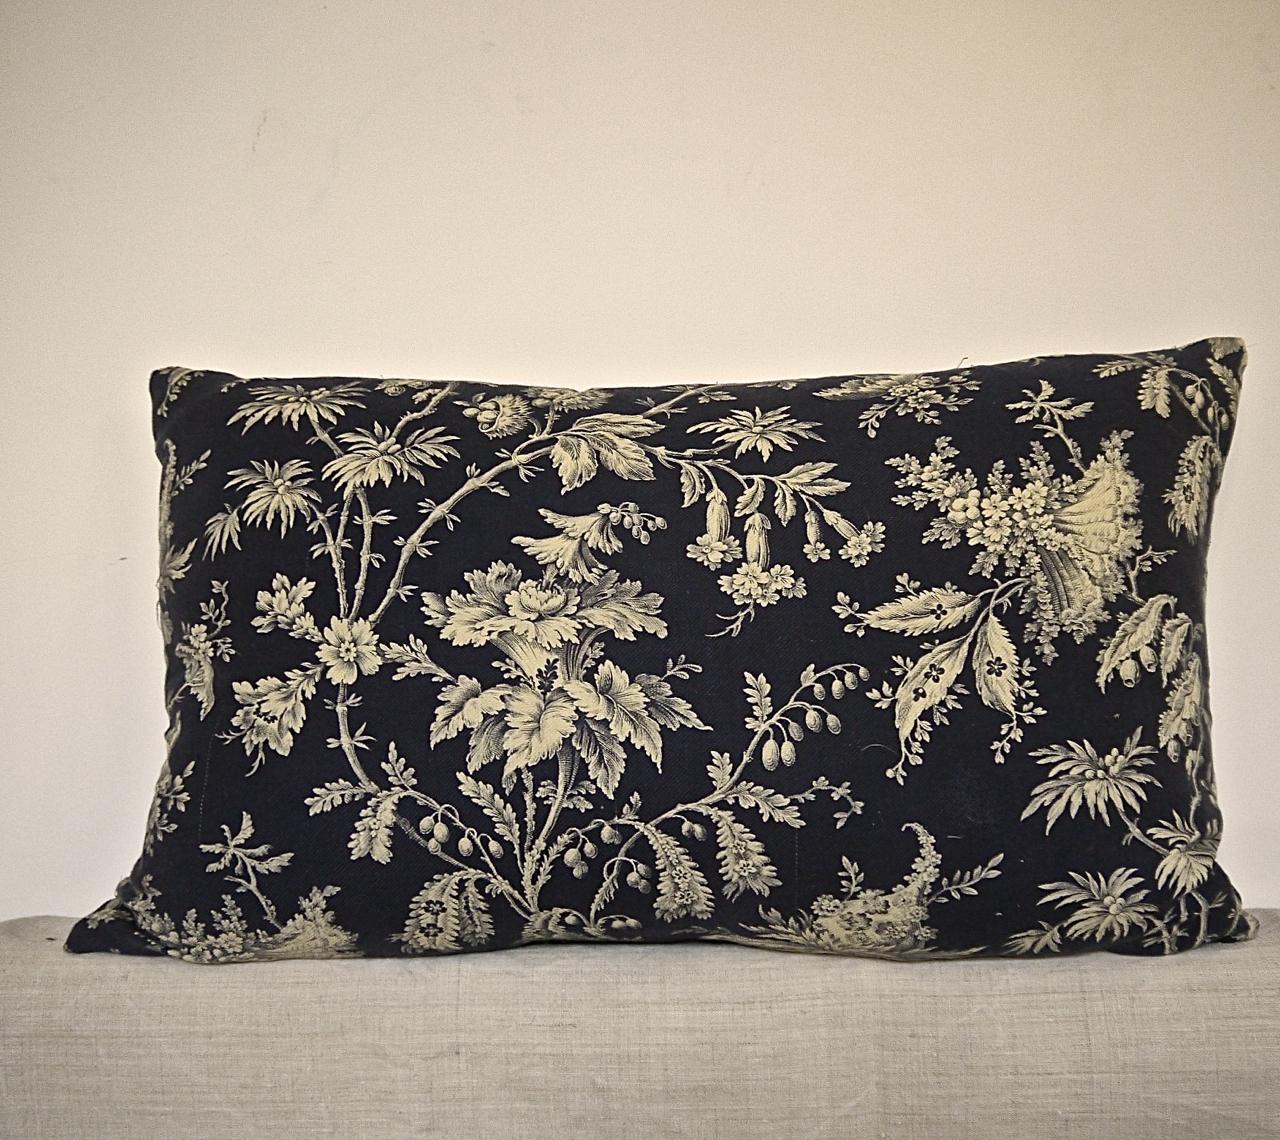 French printed cotton cushion. Printed with a design of exotic flowers and meandering branches on a textured cotton. Self-backed and slip-stitched closed with a duck feather insert, circa 1870s.